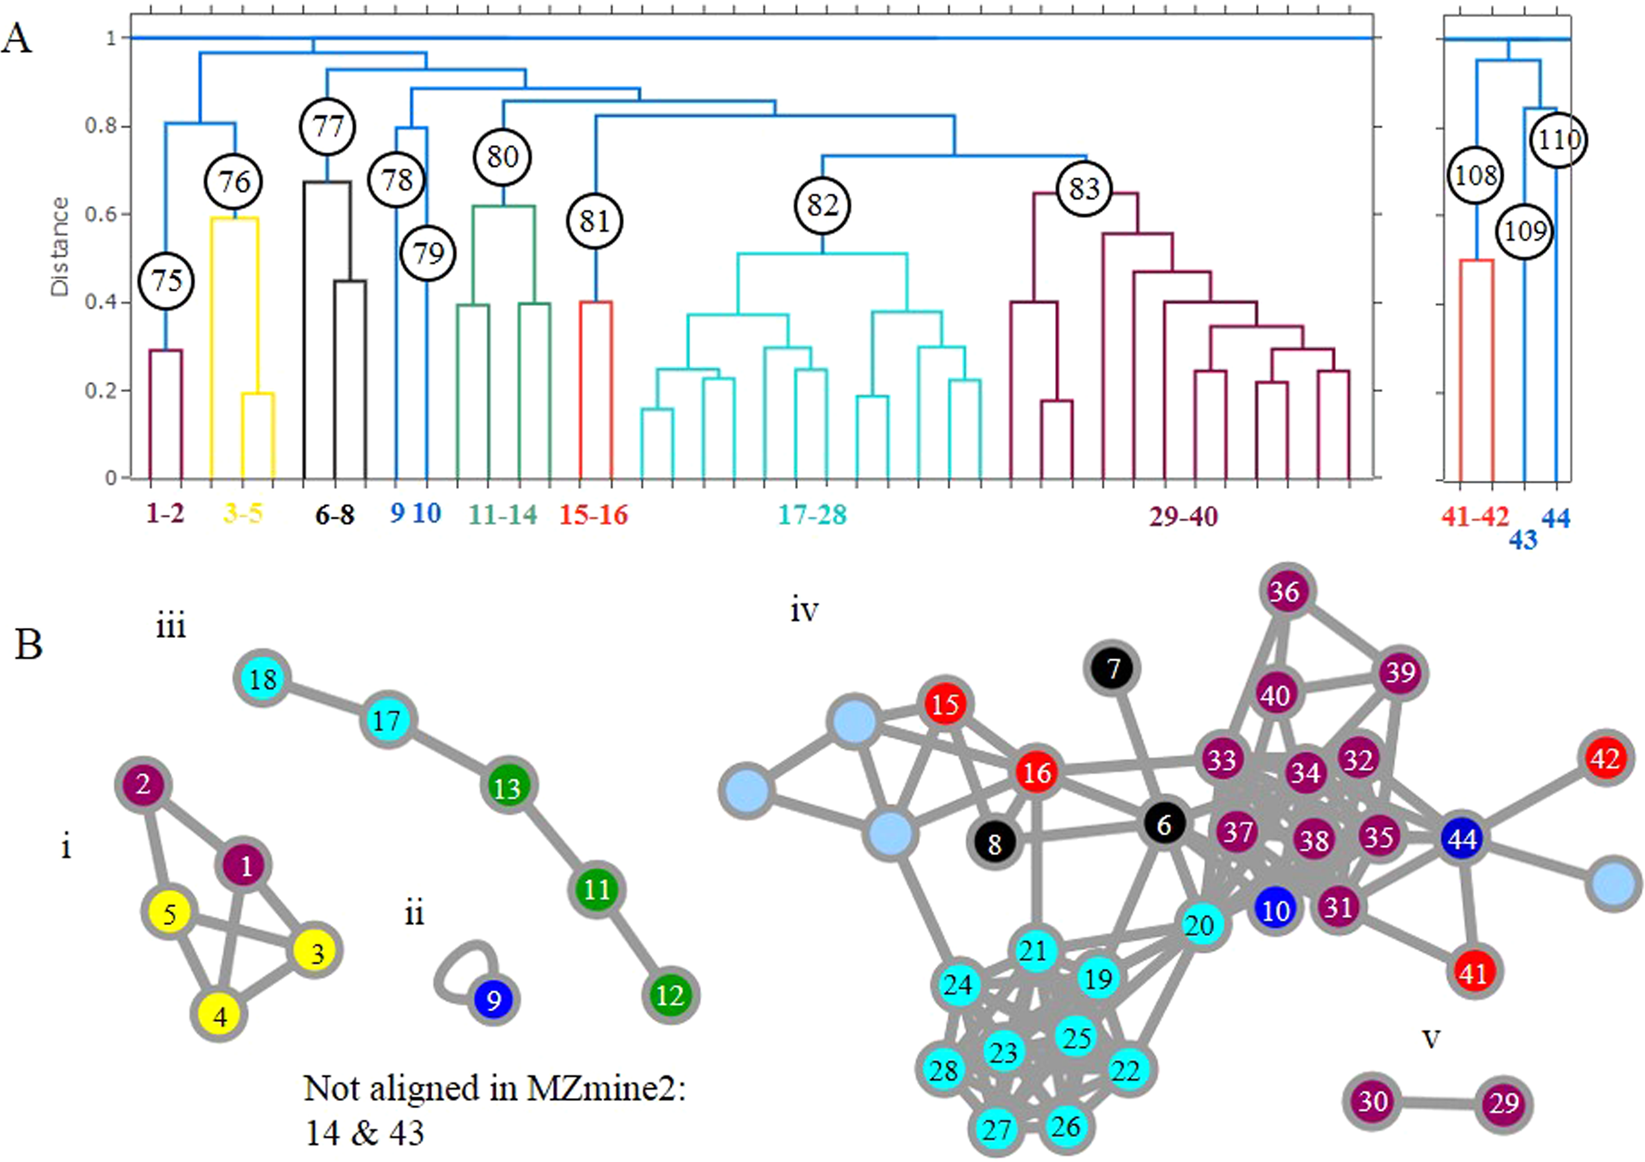 Hierarchical Clustering. Spectral Clustering. Clustering sklearn. ISODATA кластеризация.